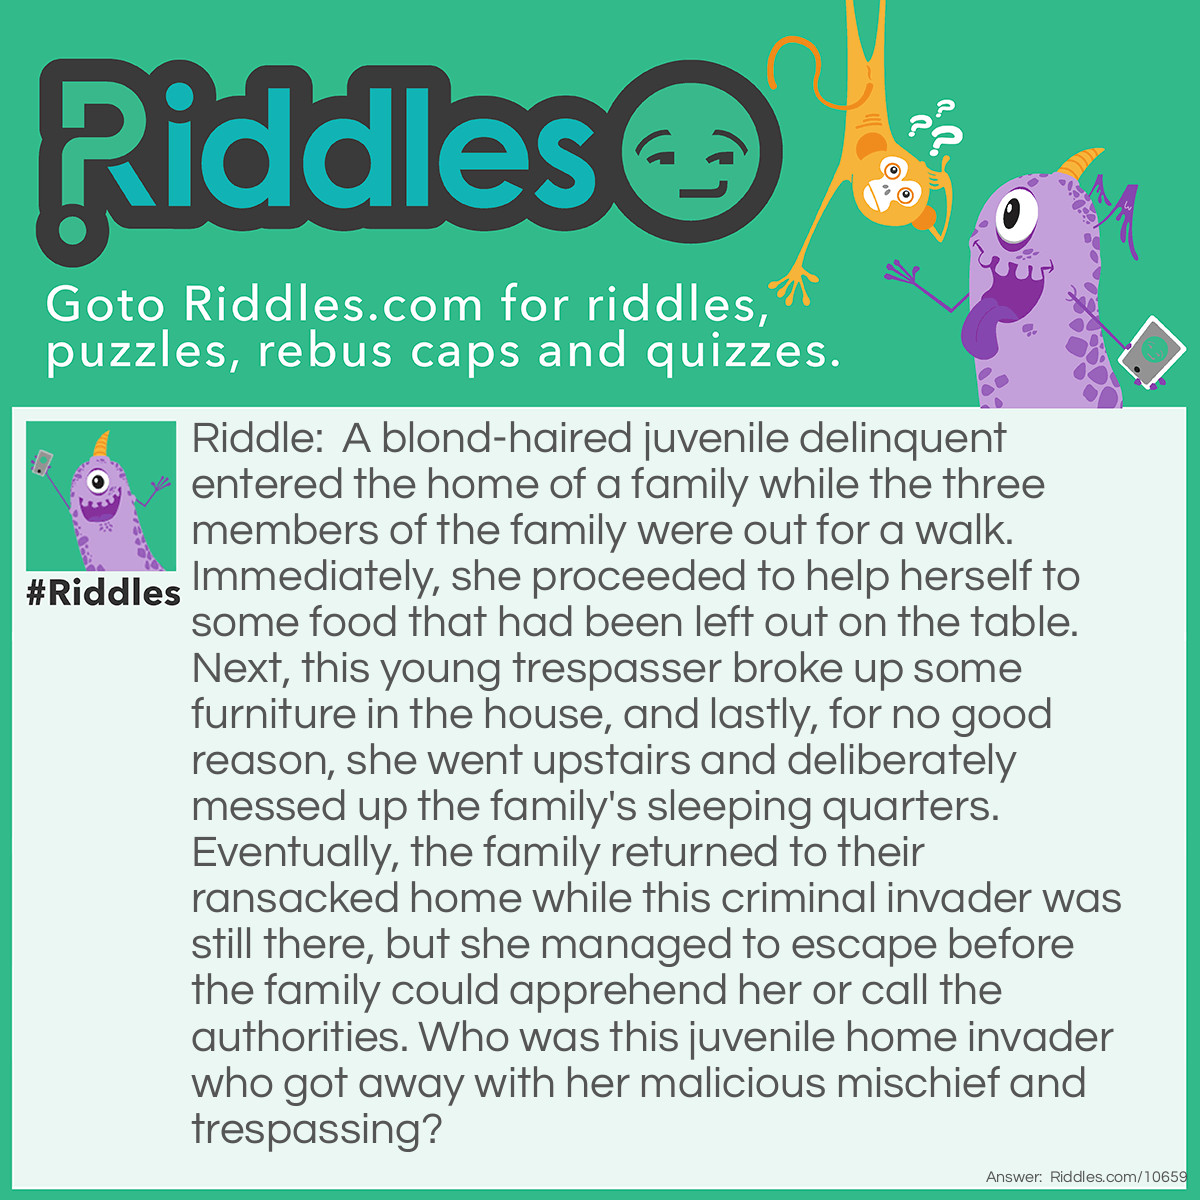 Riddle: A blond-haired juvenile delinquent entered the home of a family while the three members of the family were out for a walk. Immediately, she proceeded to help herself to some food that had been left out on the table. Next, this young trespasser broke up some furniture in the house, and lastly, for no good reason, she went upstairs and deliberately messed up the family's sleeping quarters. Eventually, the family returned to their ransacked home while this criminal invader was still there, but she managed to escape before the family could apprehend her or call the authorities. Who was this juvenile home invader who got away with her malicious mischief and trespassing? Answer: Her name was Goldilocks, and she entered the home of the Three Bears without permission.